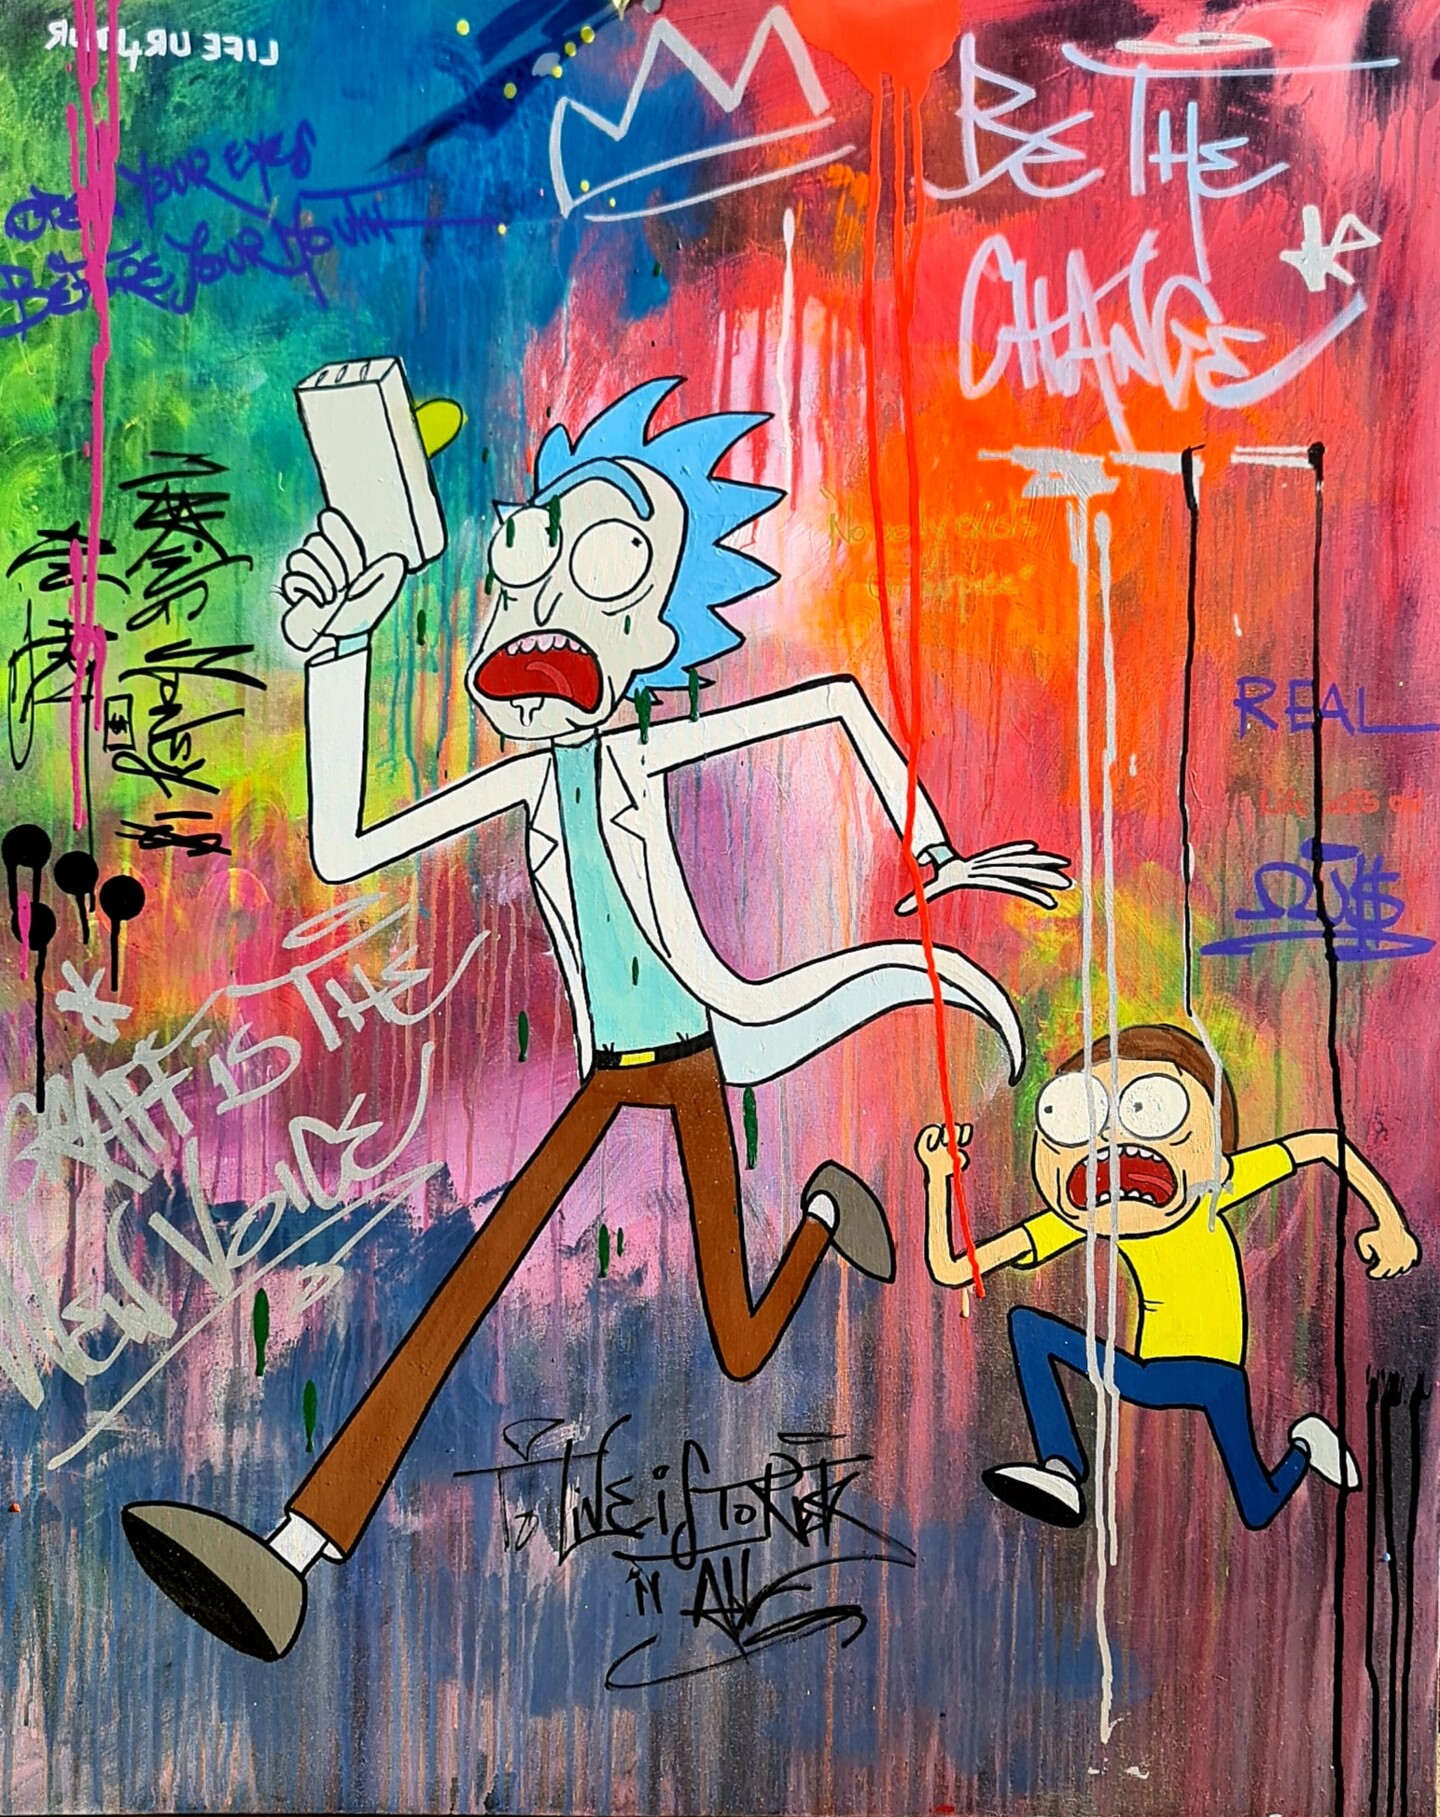 Rick And Morty N°1, Painting by Oussama Benabbou | Artmajeur